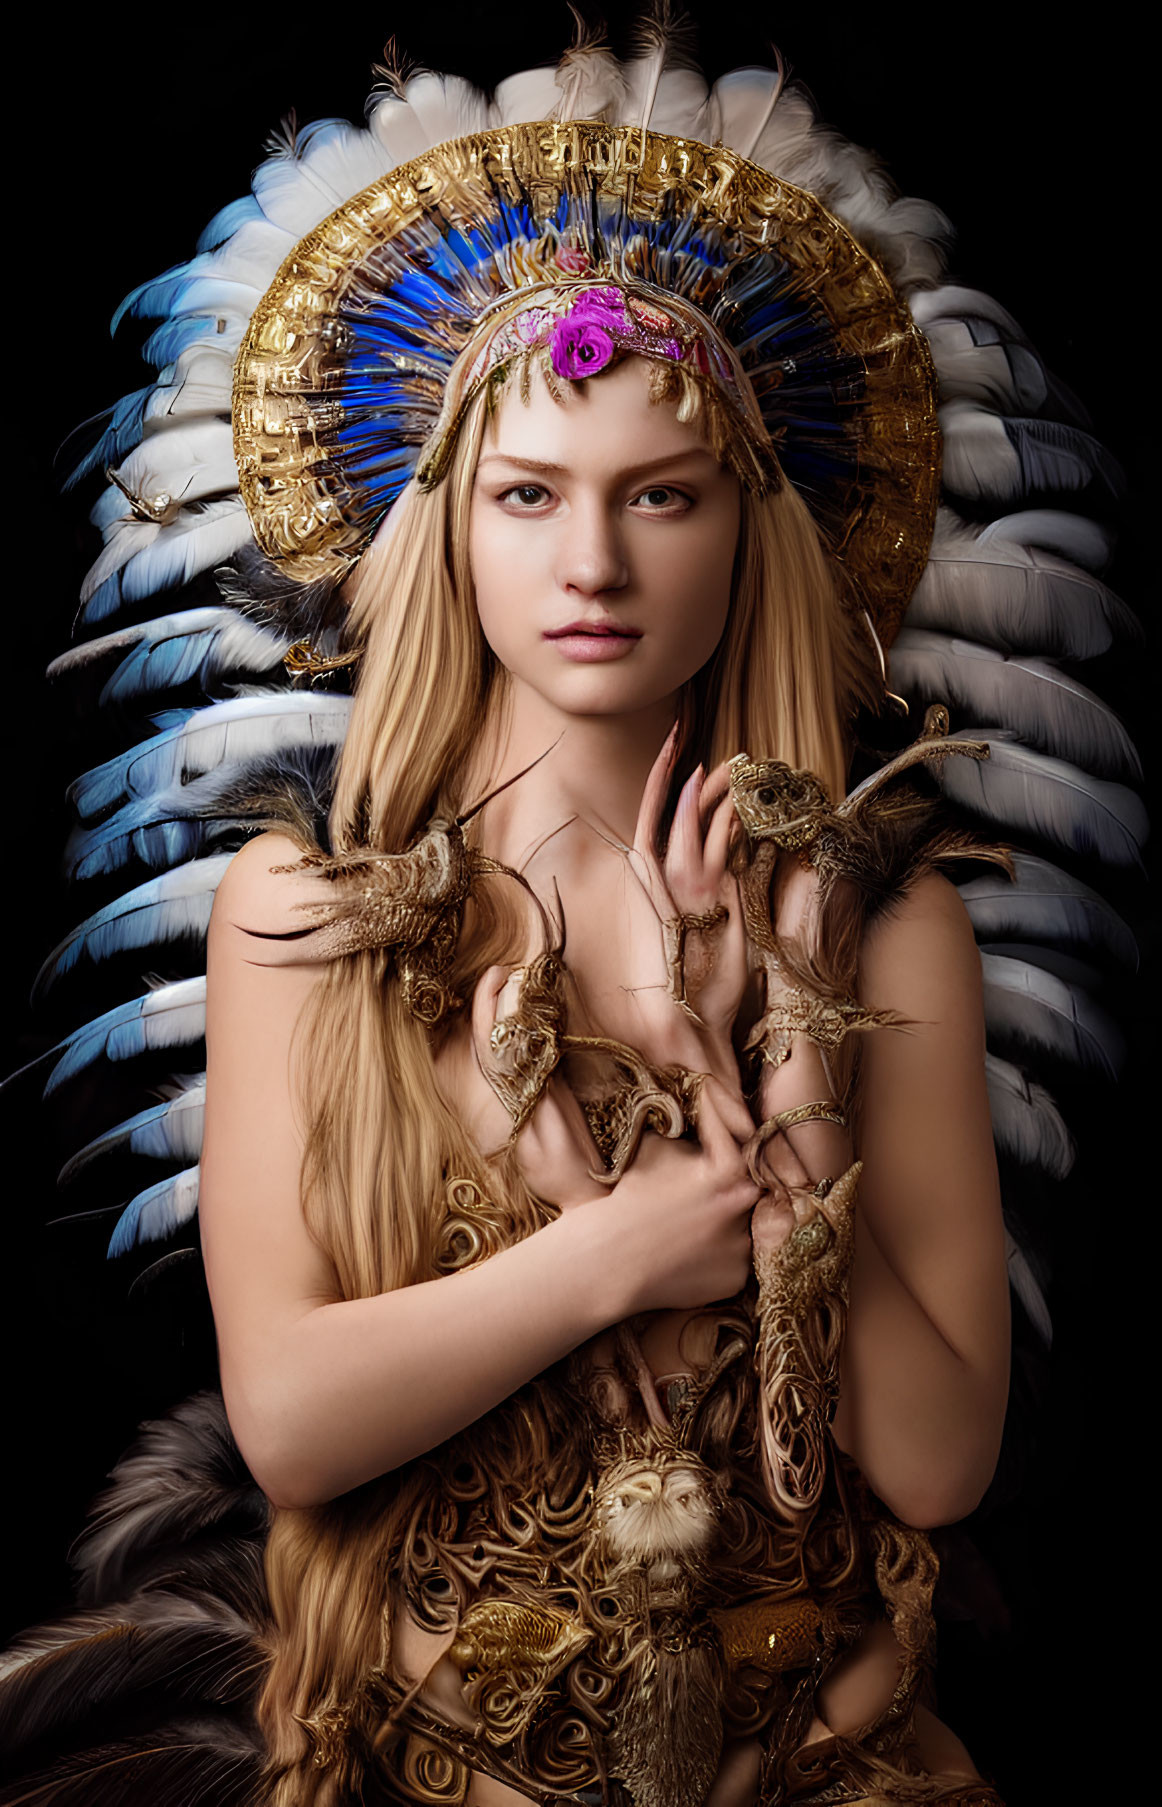 Mystical woman in golden halo and feather headdress with ornate armor